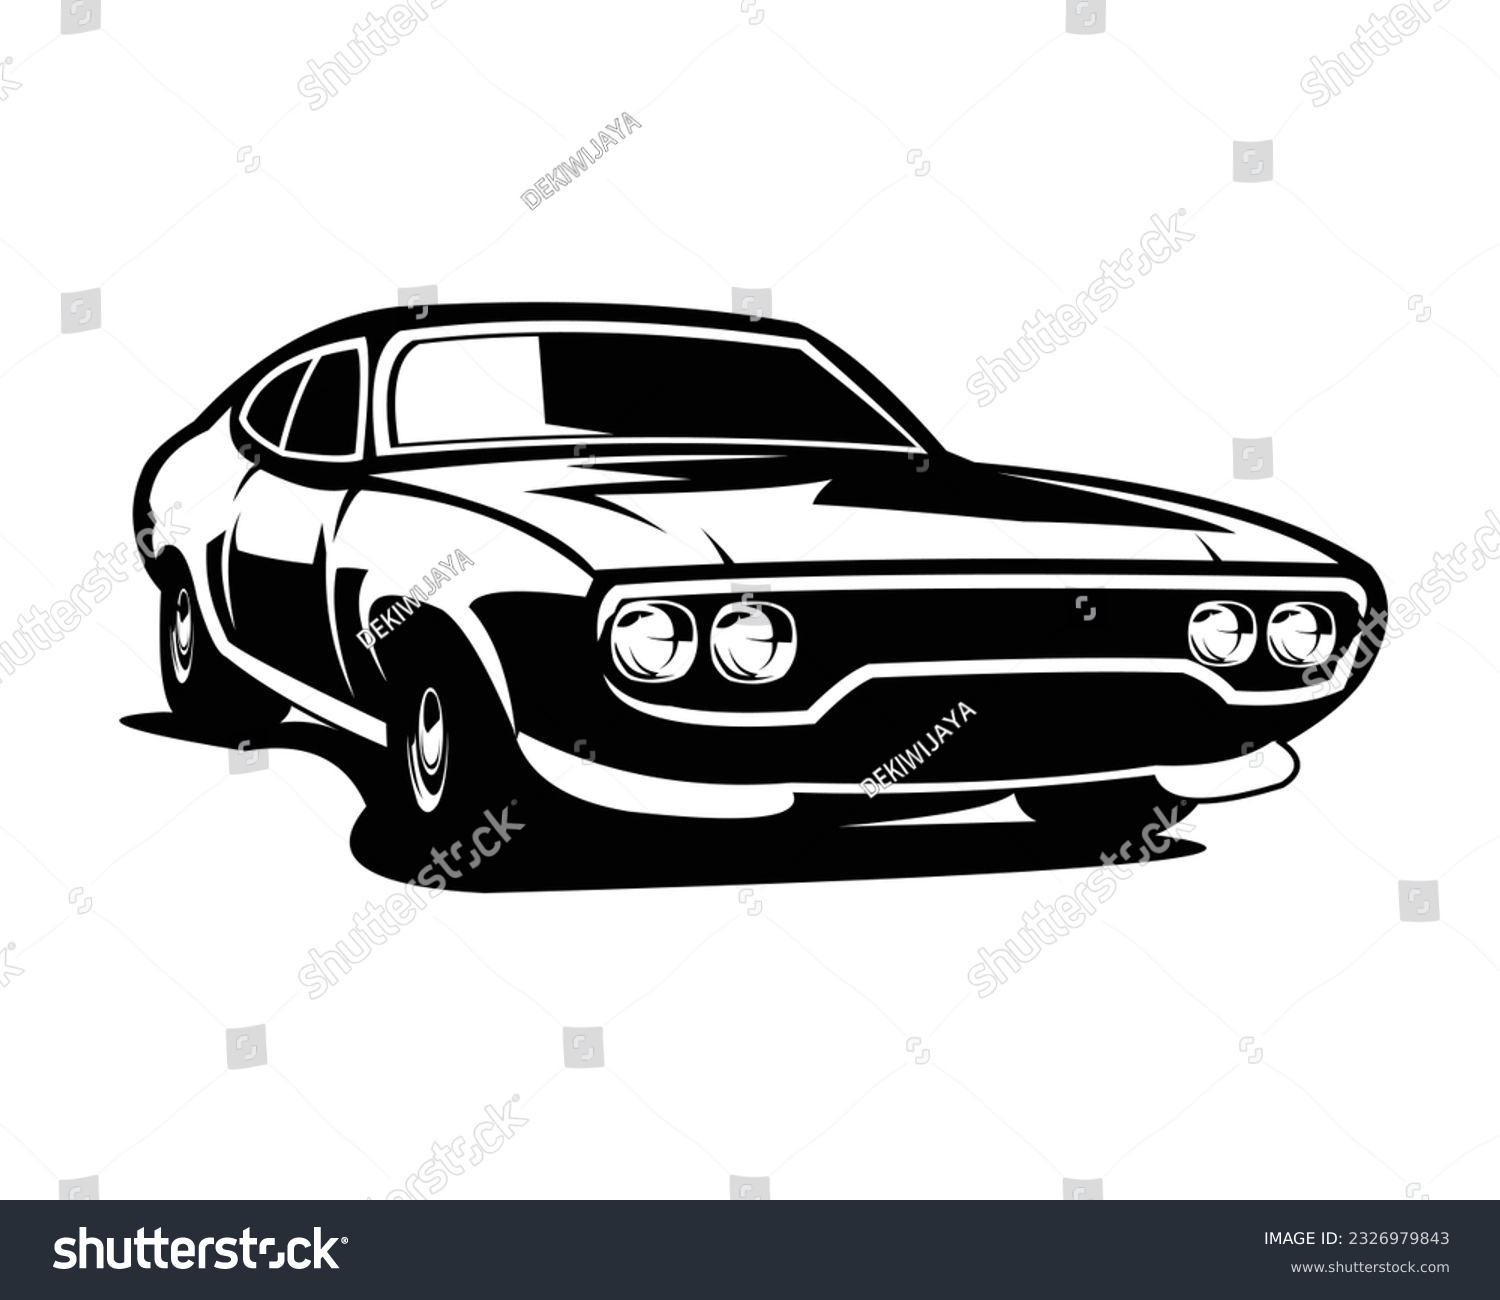 SVG of old camaro car logo. silhouette vector. isolated white background view from front. Best for logo, badge, emblem, icon, design sticker, vintage car industry. available in eps 10. svg